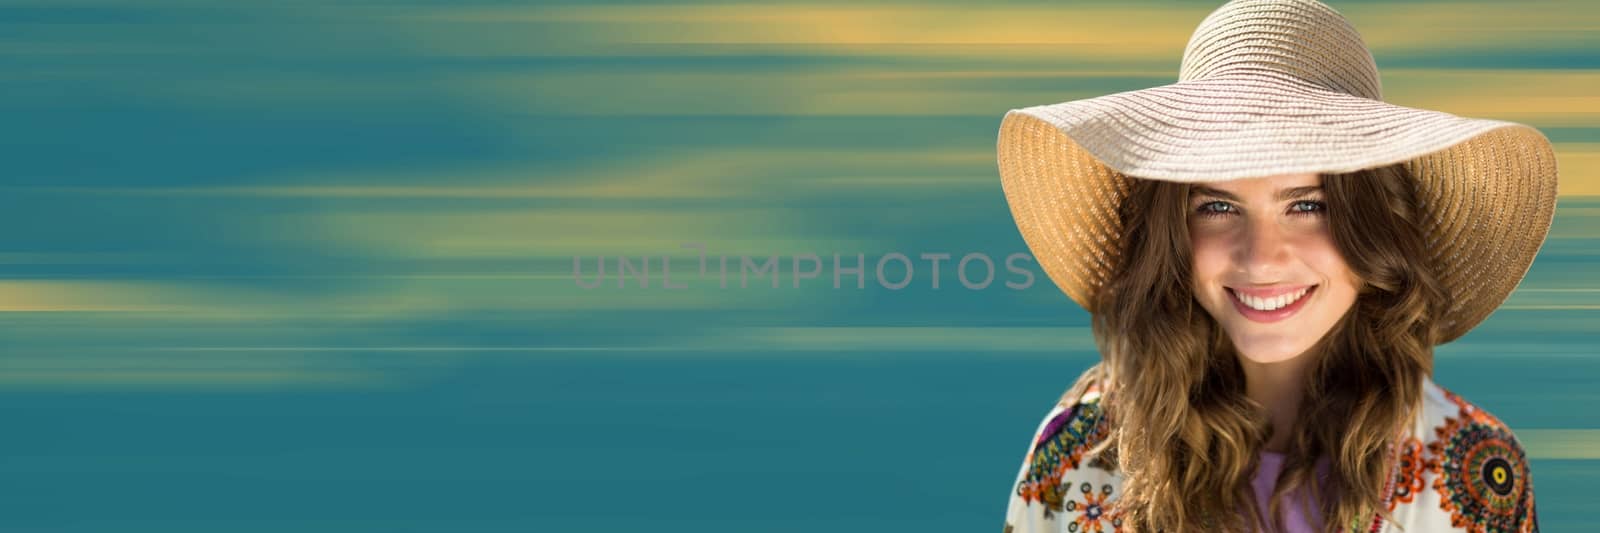 Digital composite of Close up of woman in summer hat against blurry yellow and blue background